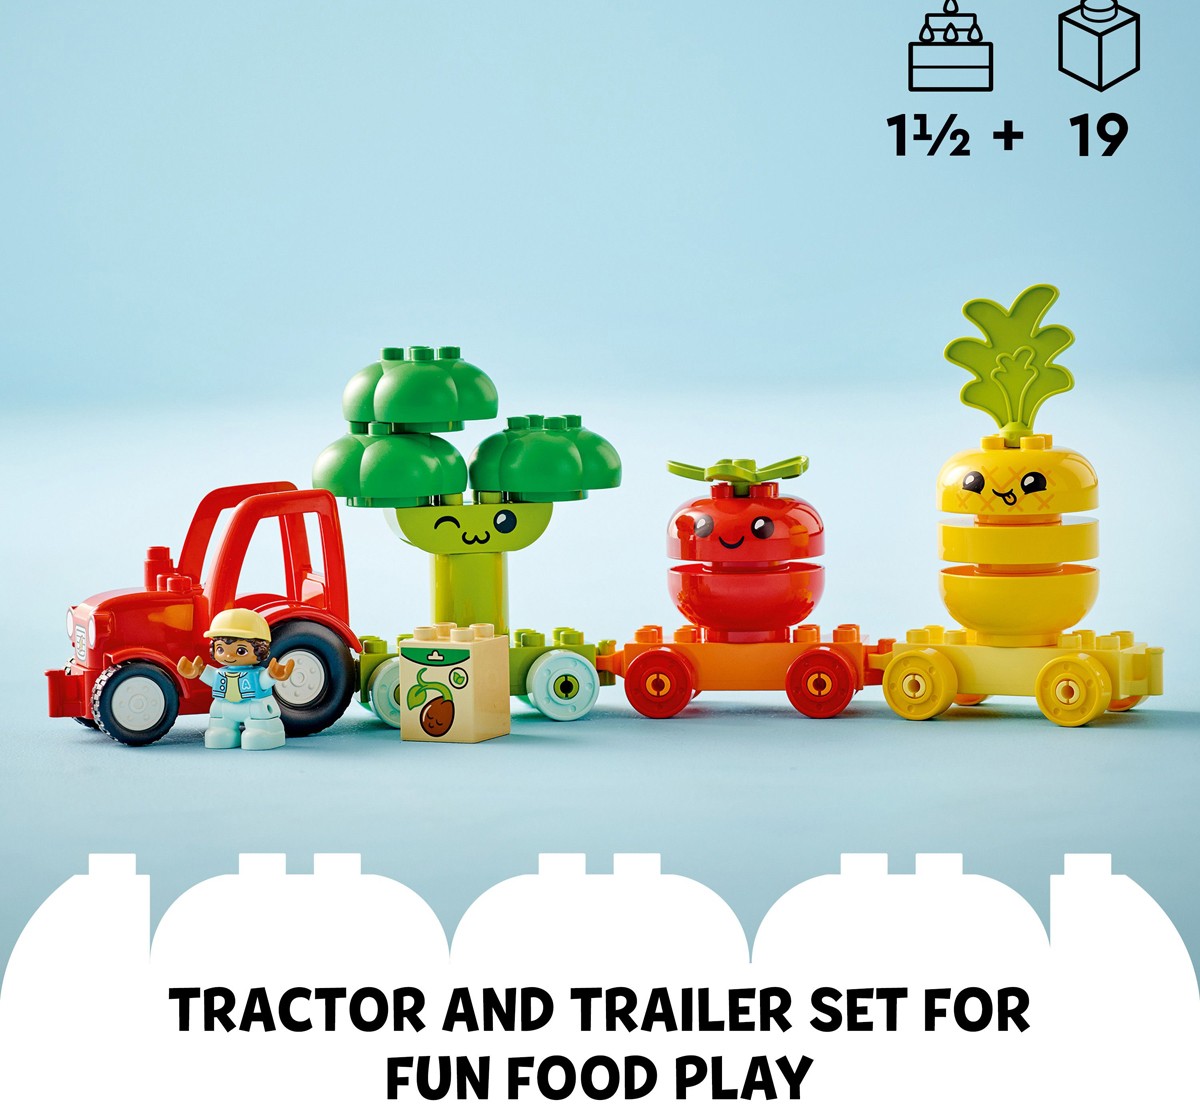 LEGO DUPLO My First Fruit and Vegetable Tractor 10982 Building Toy Set 19 Pieces Multicolour 1M+